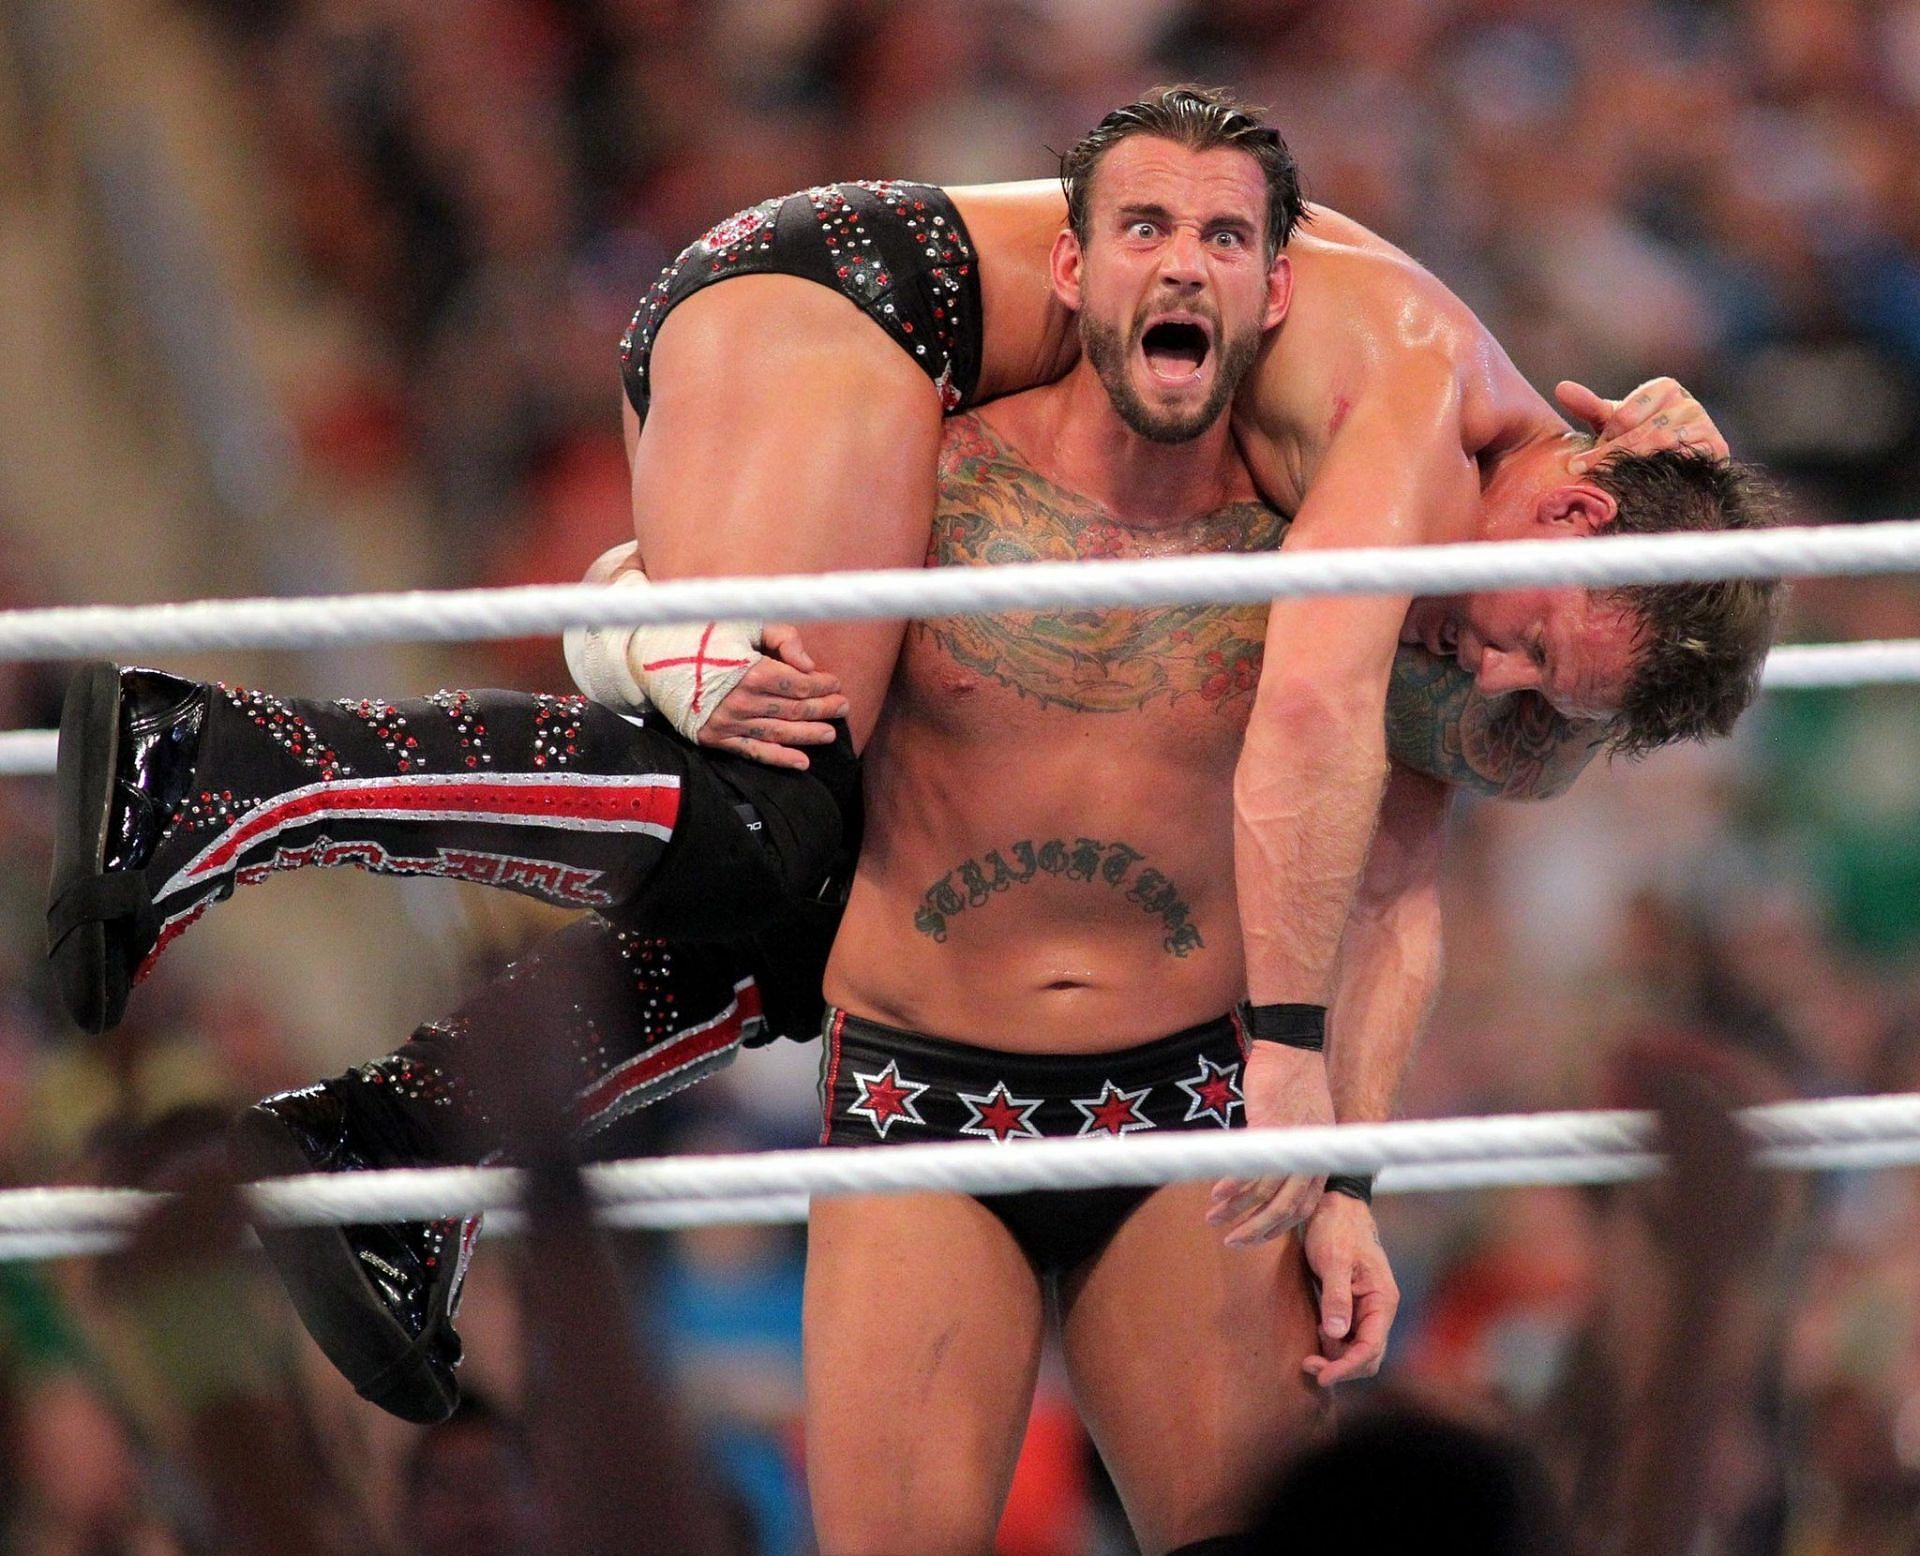 CM Punk has been the talk of the wrestling world ever since he returned to the ring.